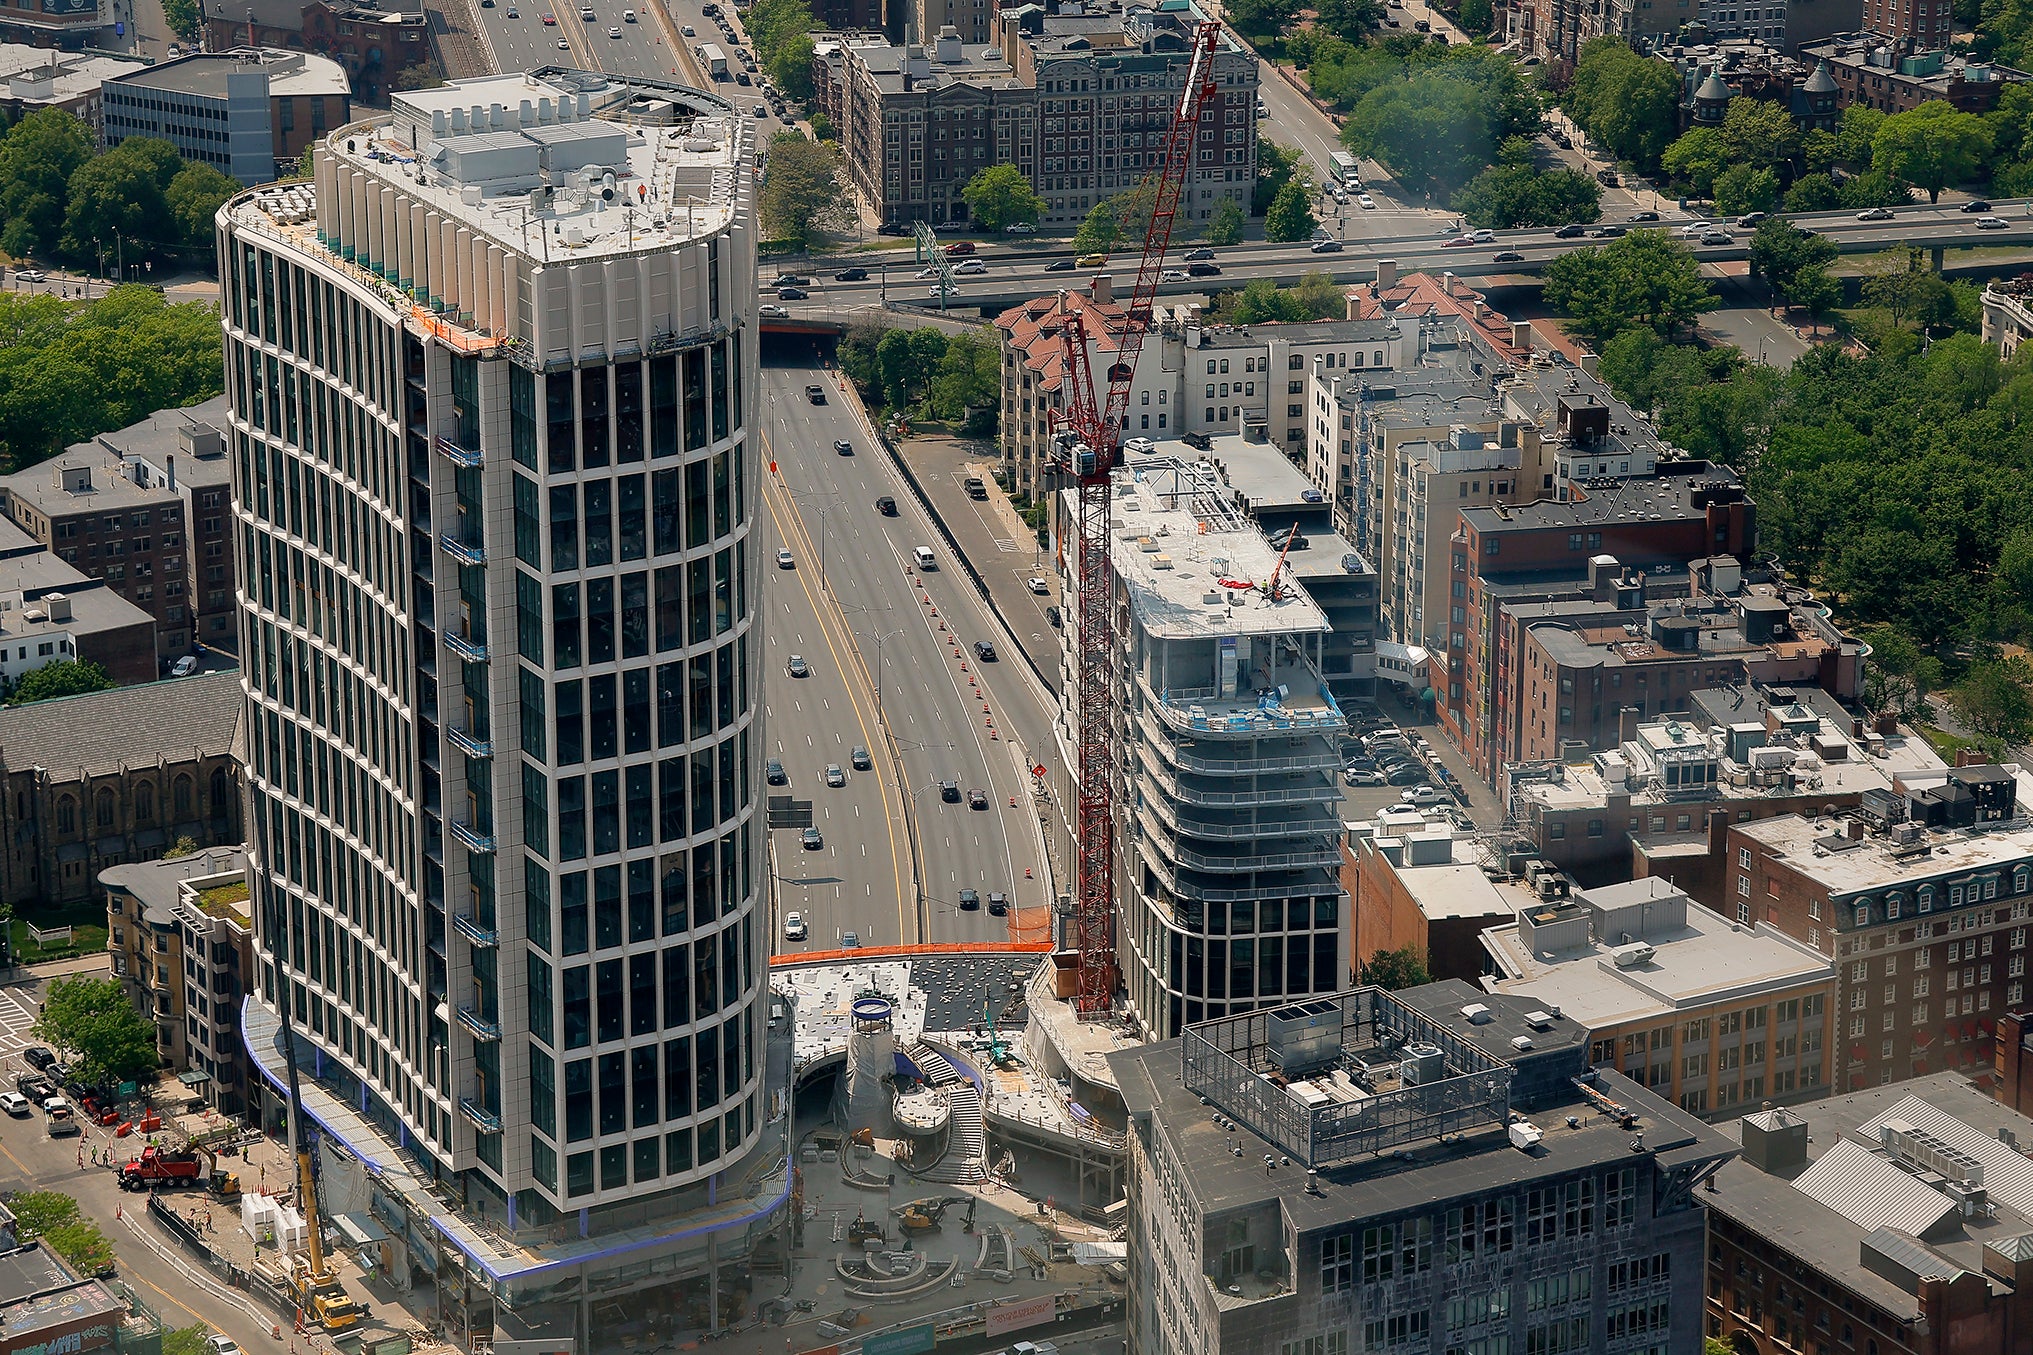 New towers built over the Massachusetts Turnpike as seen from View Boston, the viewing platform on the upper floors of the Prudential tower.